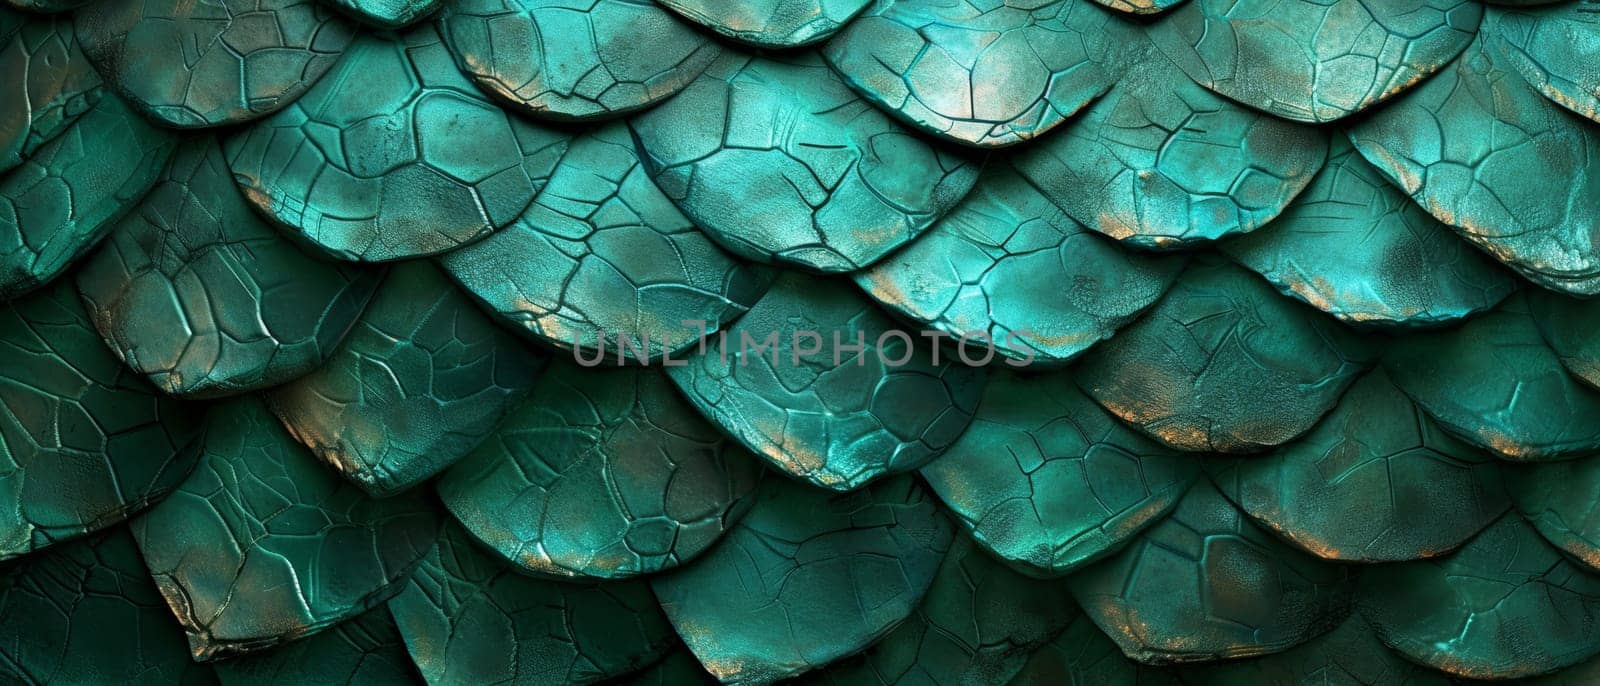 Green dragon scale pattern close-up - luxury background texture for wallpaper. by sfinks